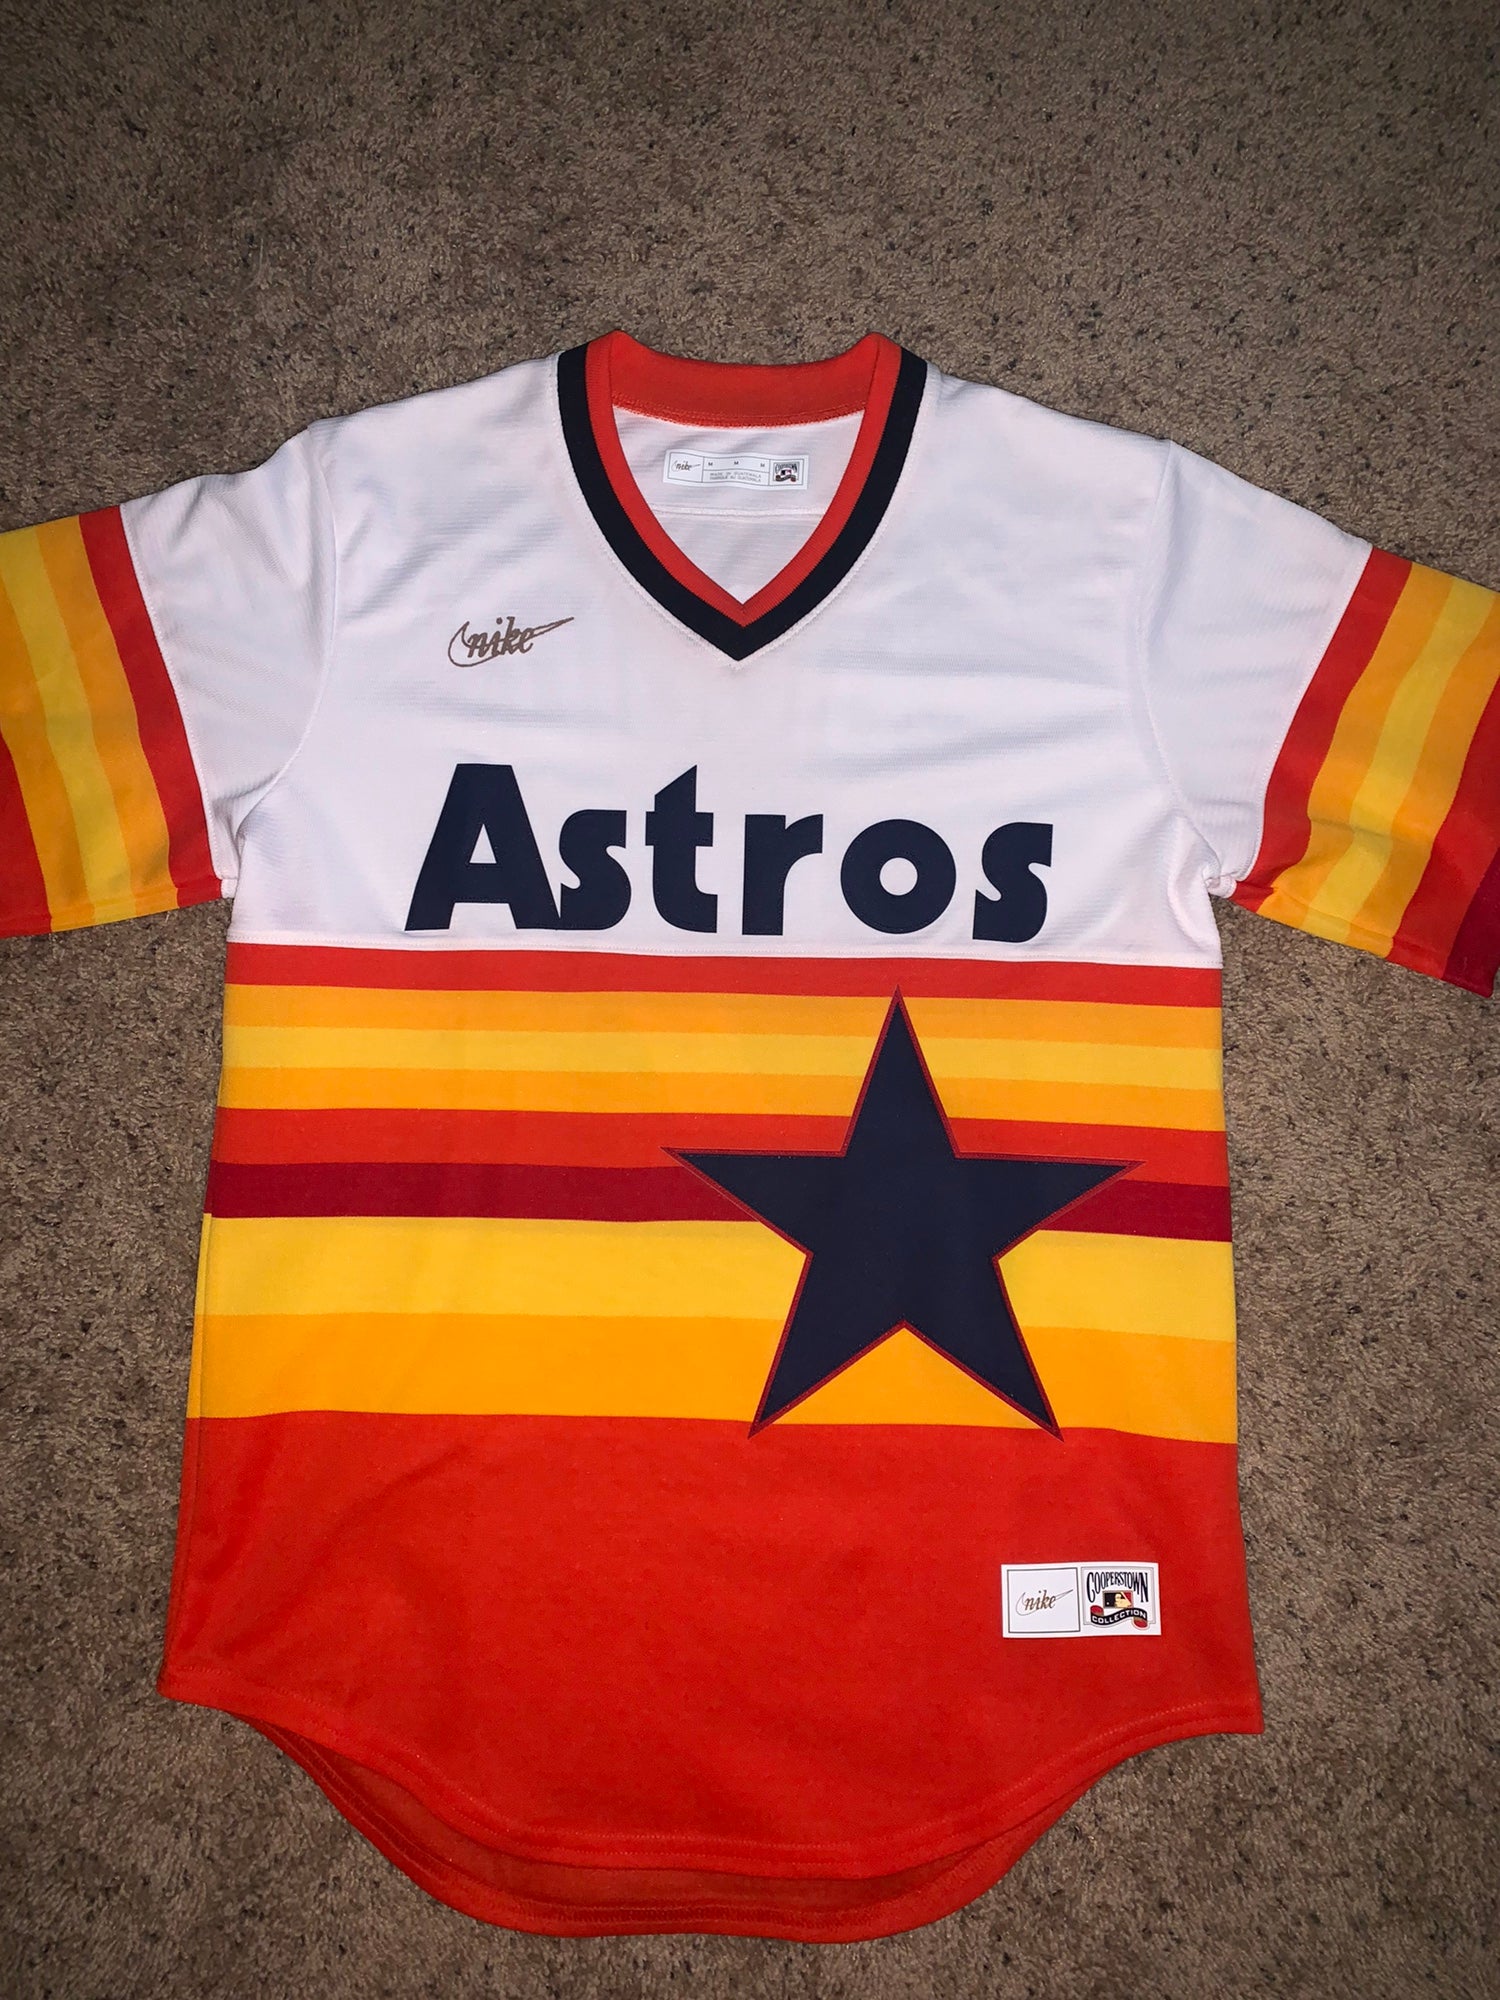 Looking for the Nike Biggio Gold Star jersey : r/Astros